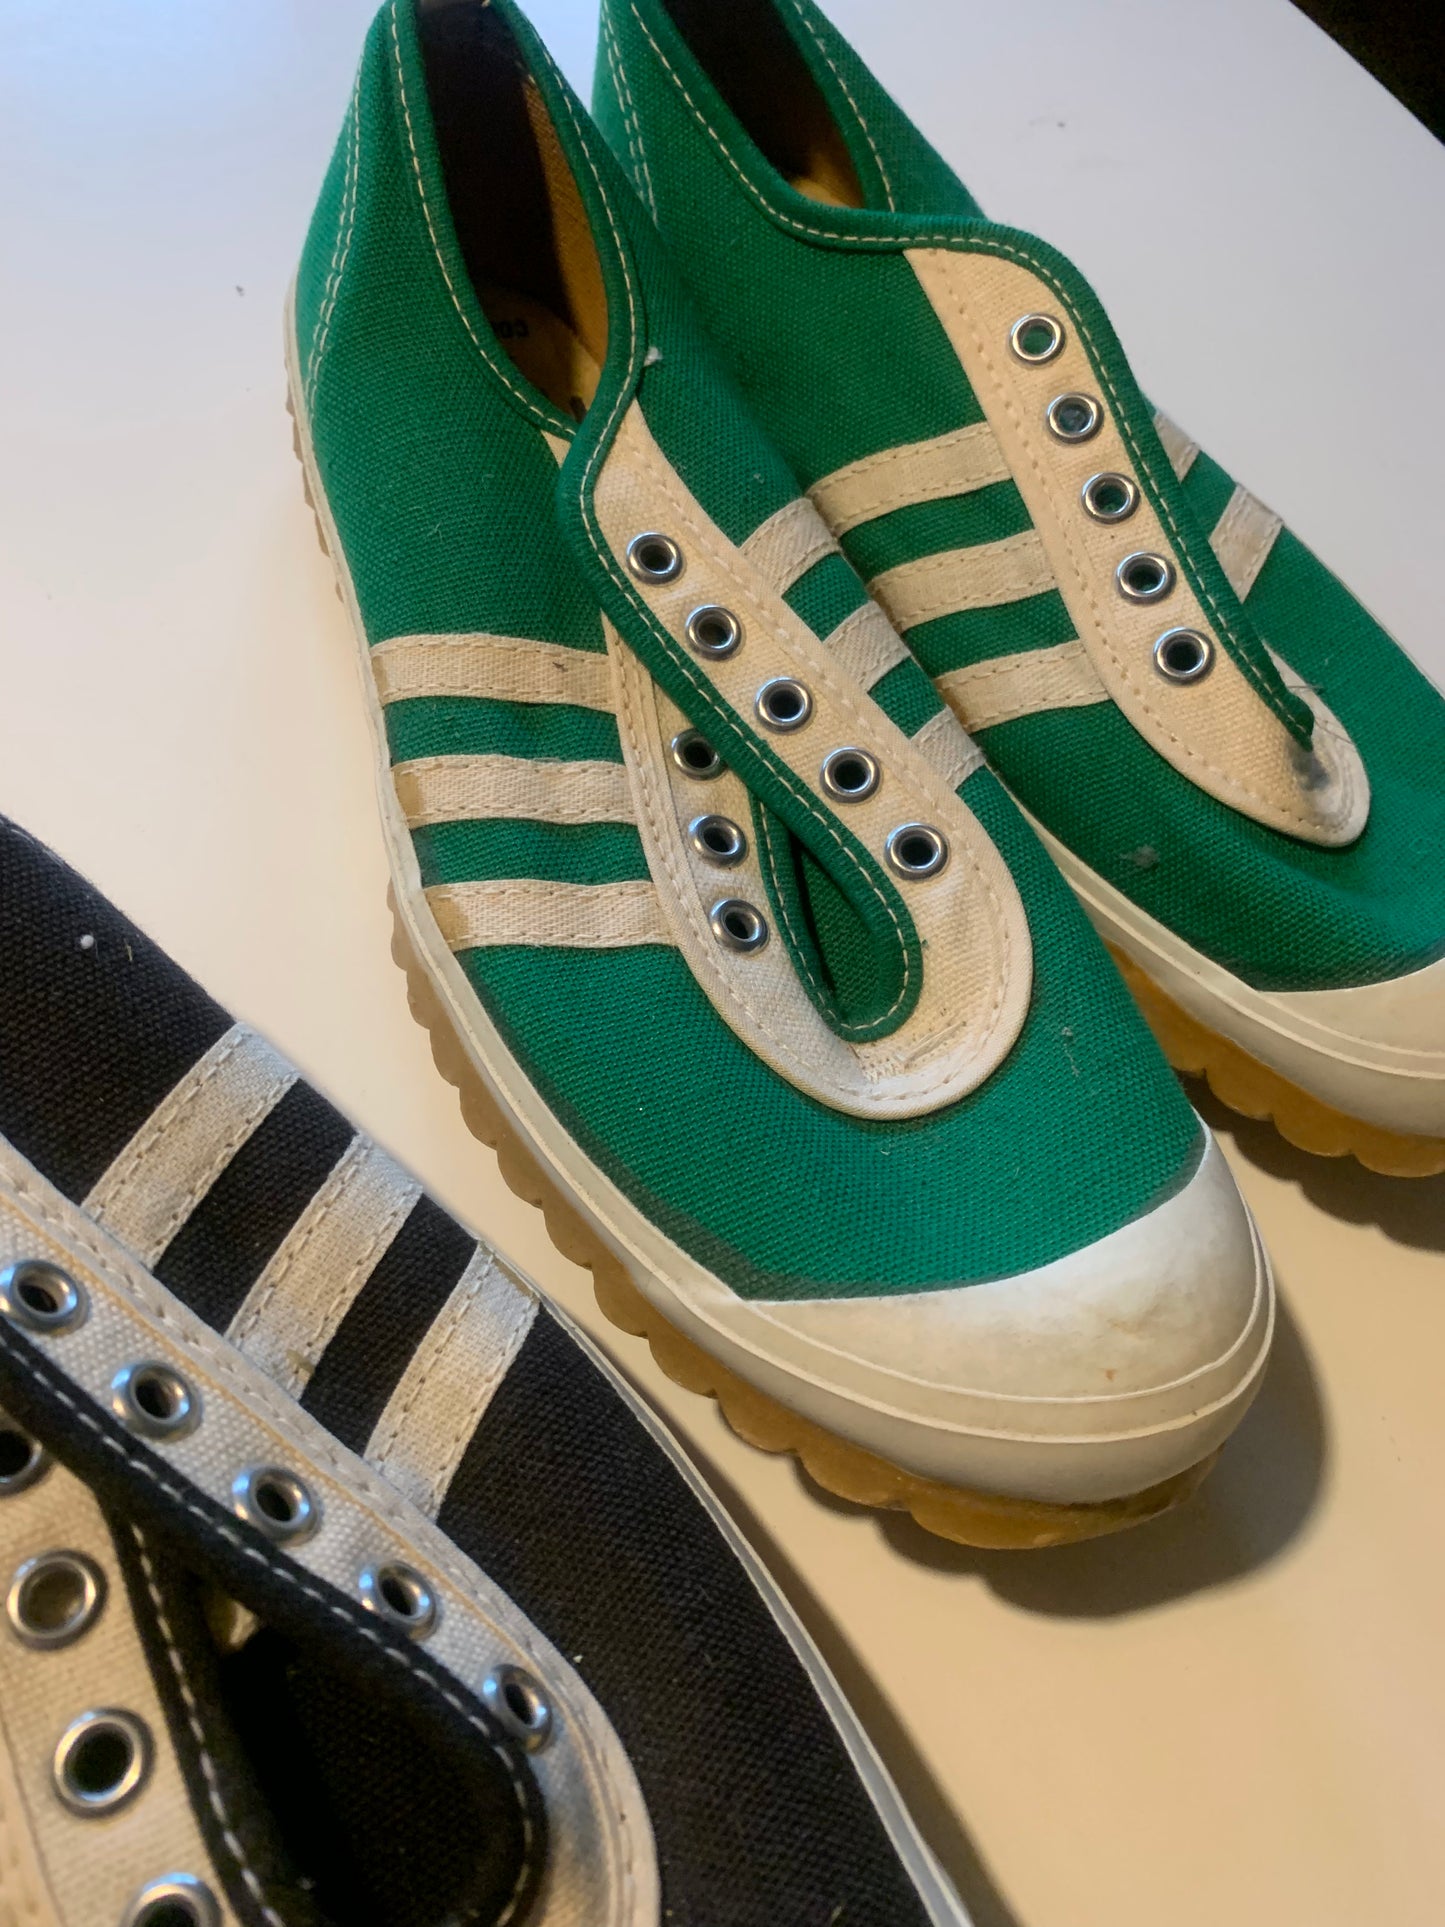 Lot 2 Pairs Kids Striped Canvas Sneakers Shoes circa 1970s